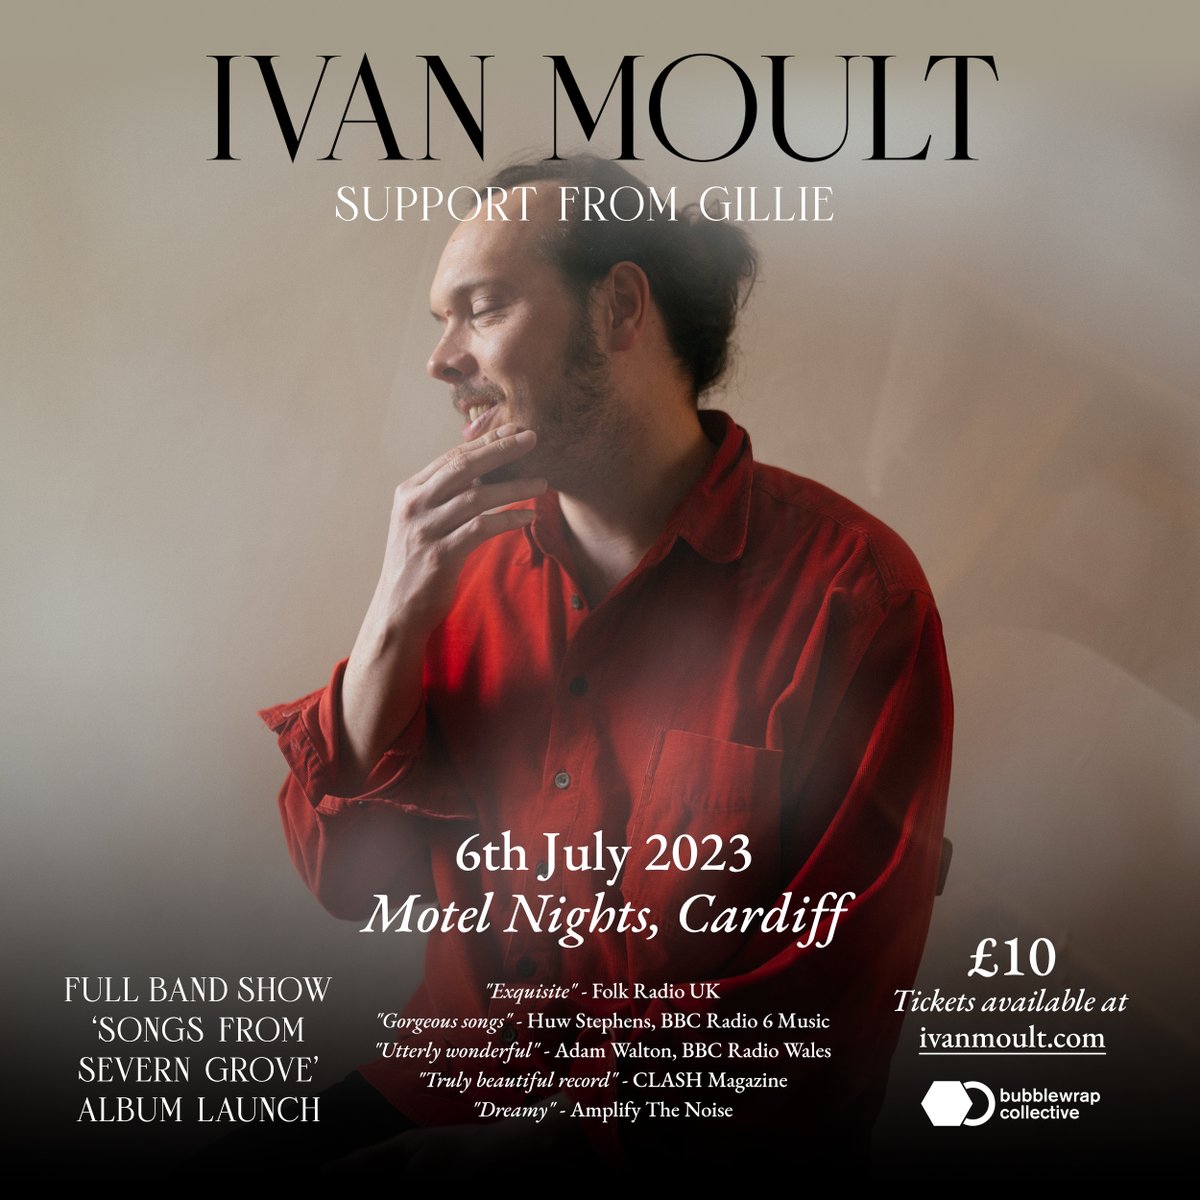 THIS THURSDAY / NOS IAU YMA @ivanmoult live at @motelnightsuk with support from Gillie Get your 🎫 here: wegottickets.com/event/583647